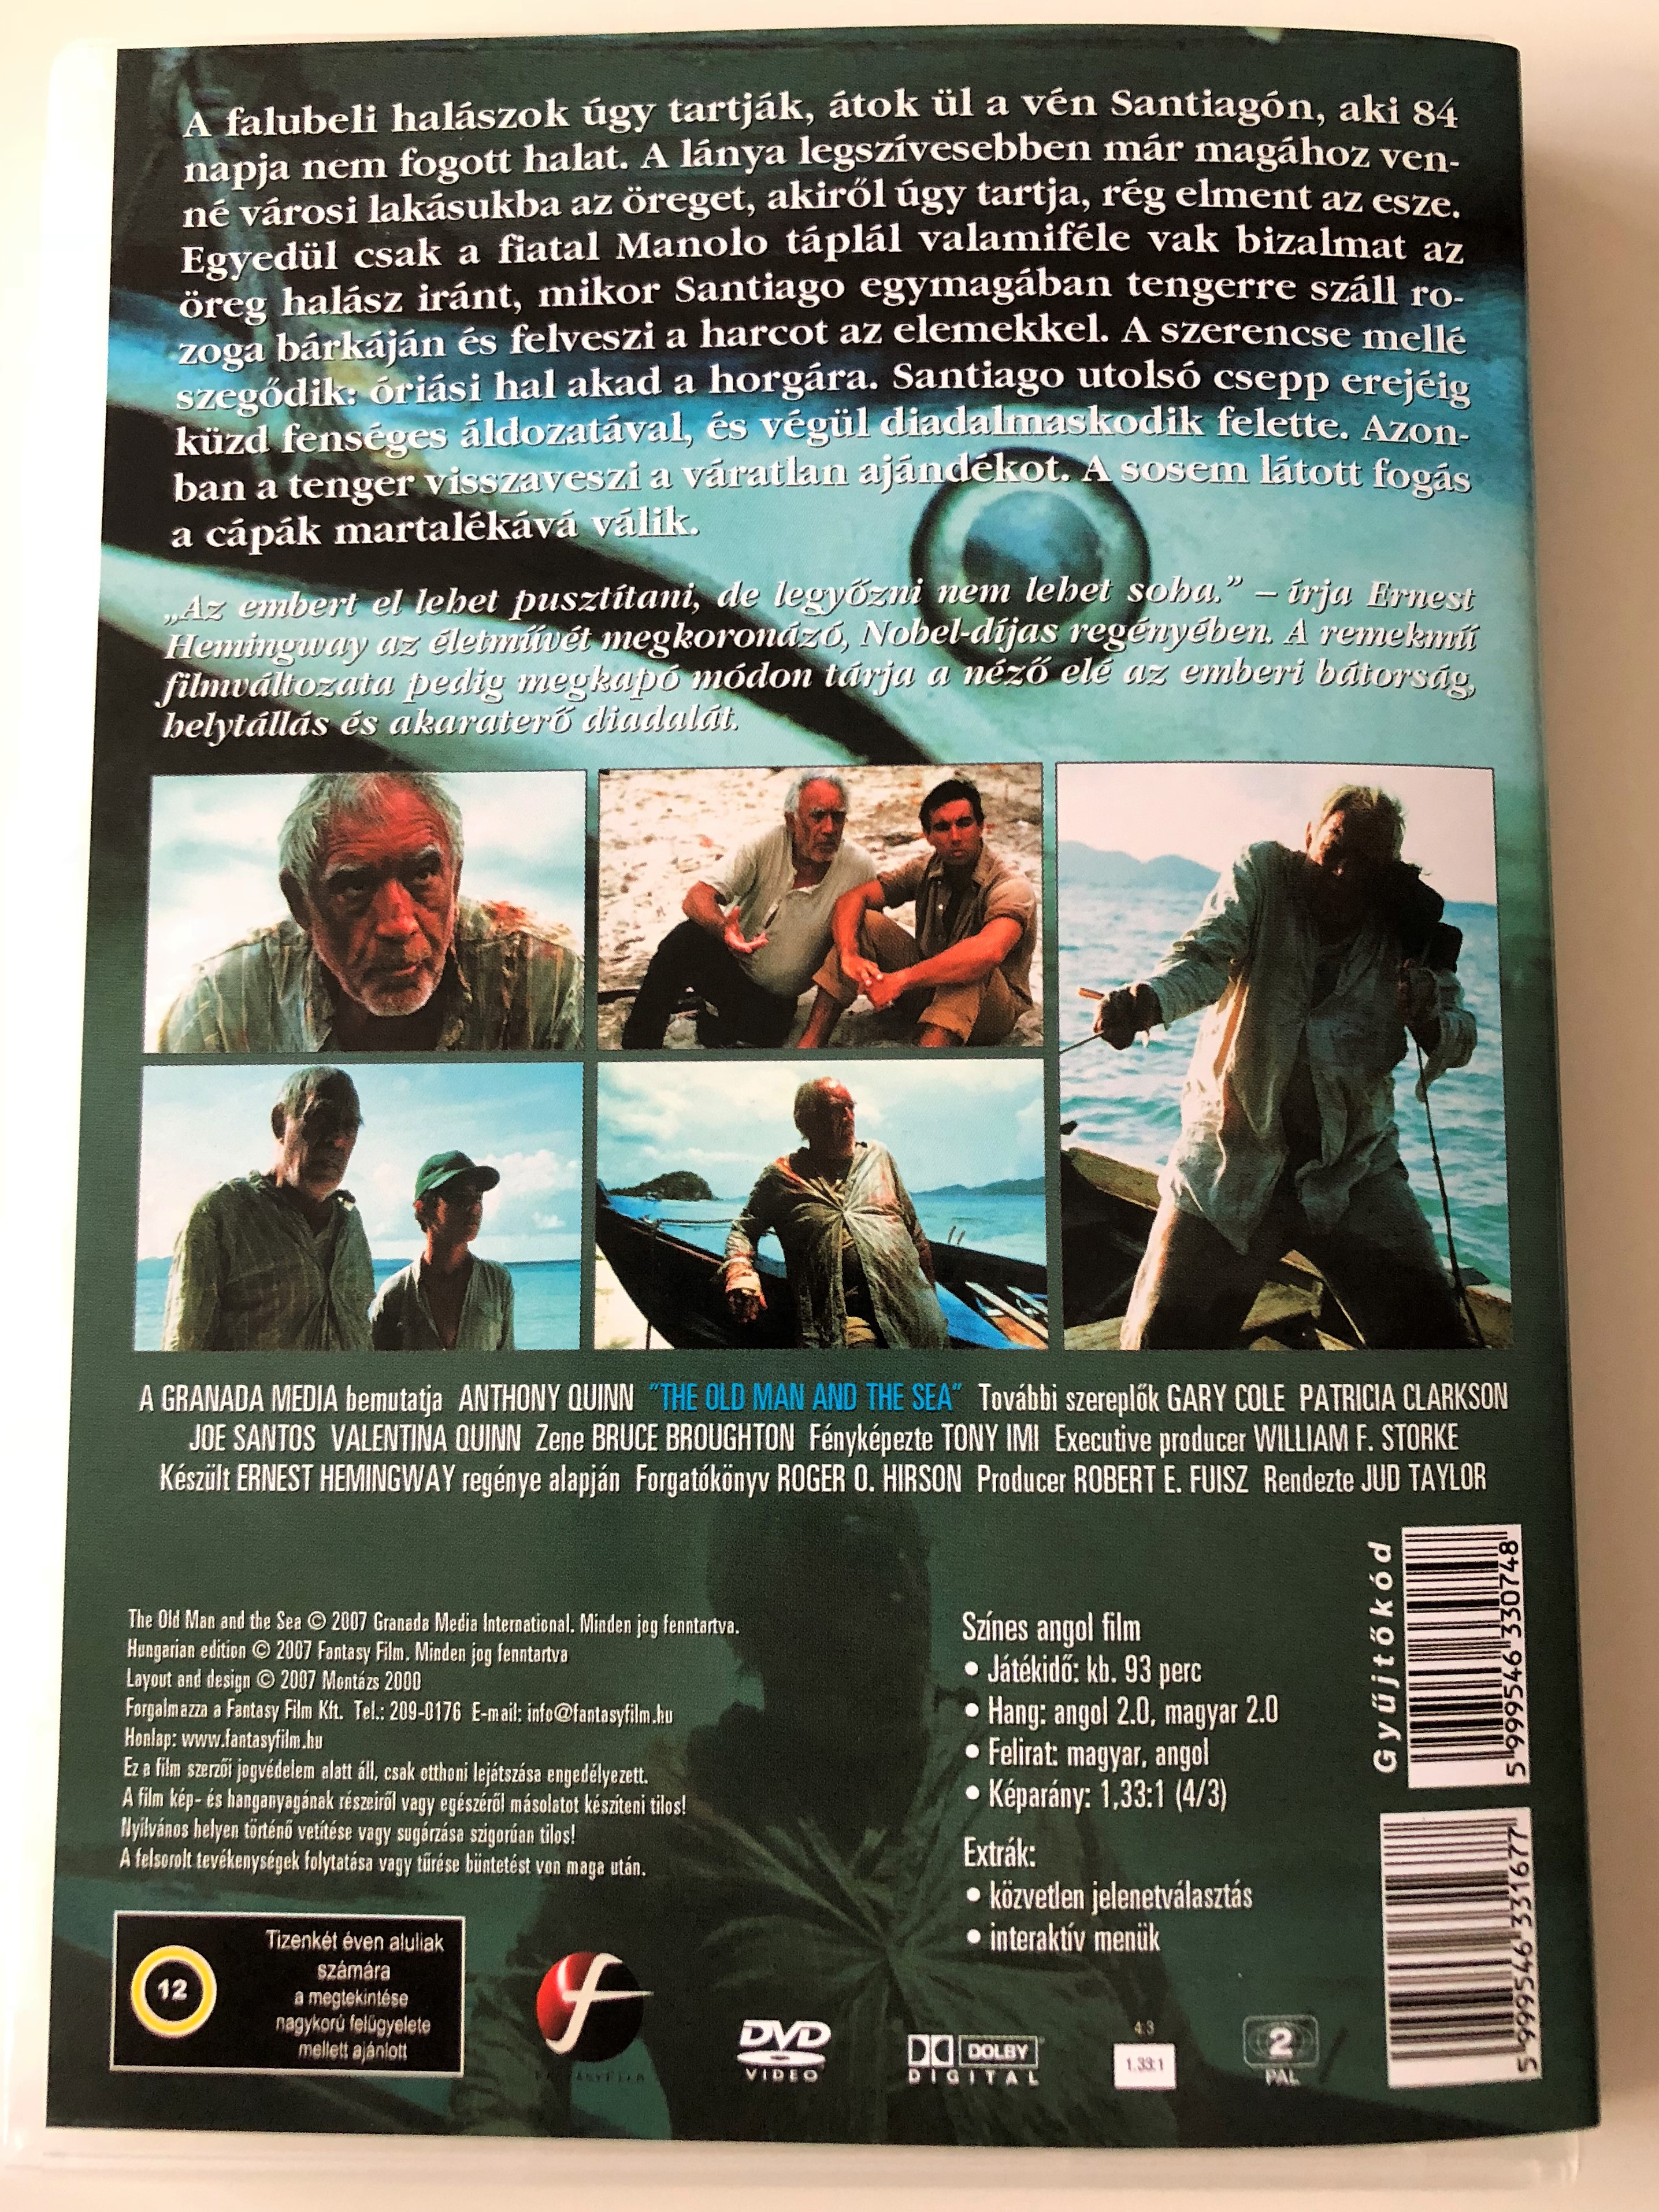 the-old-man-and-the-sea-dvd-1990-az-reg-hal-sz-s-a-tenger-directed-by-jud-taylor-starring-anthony-quinn-gary-cole-patricia-clarkson-alexis-cruz-2-.jpg